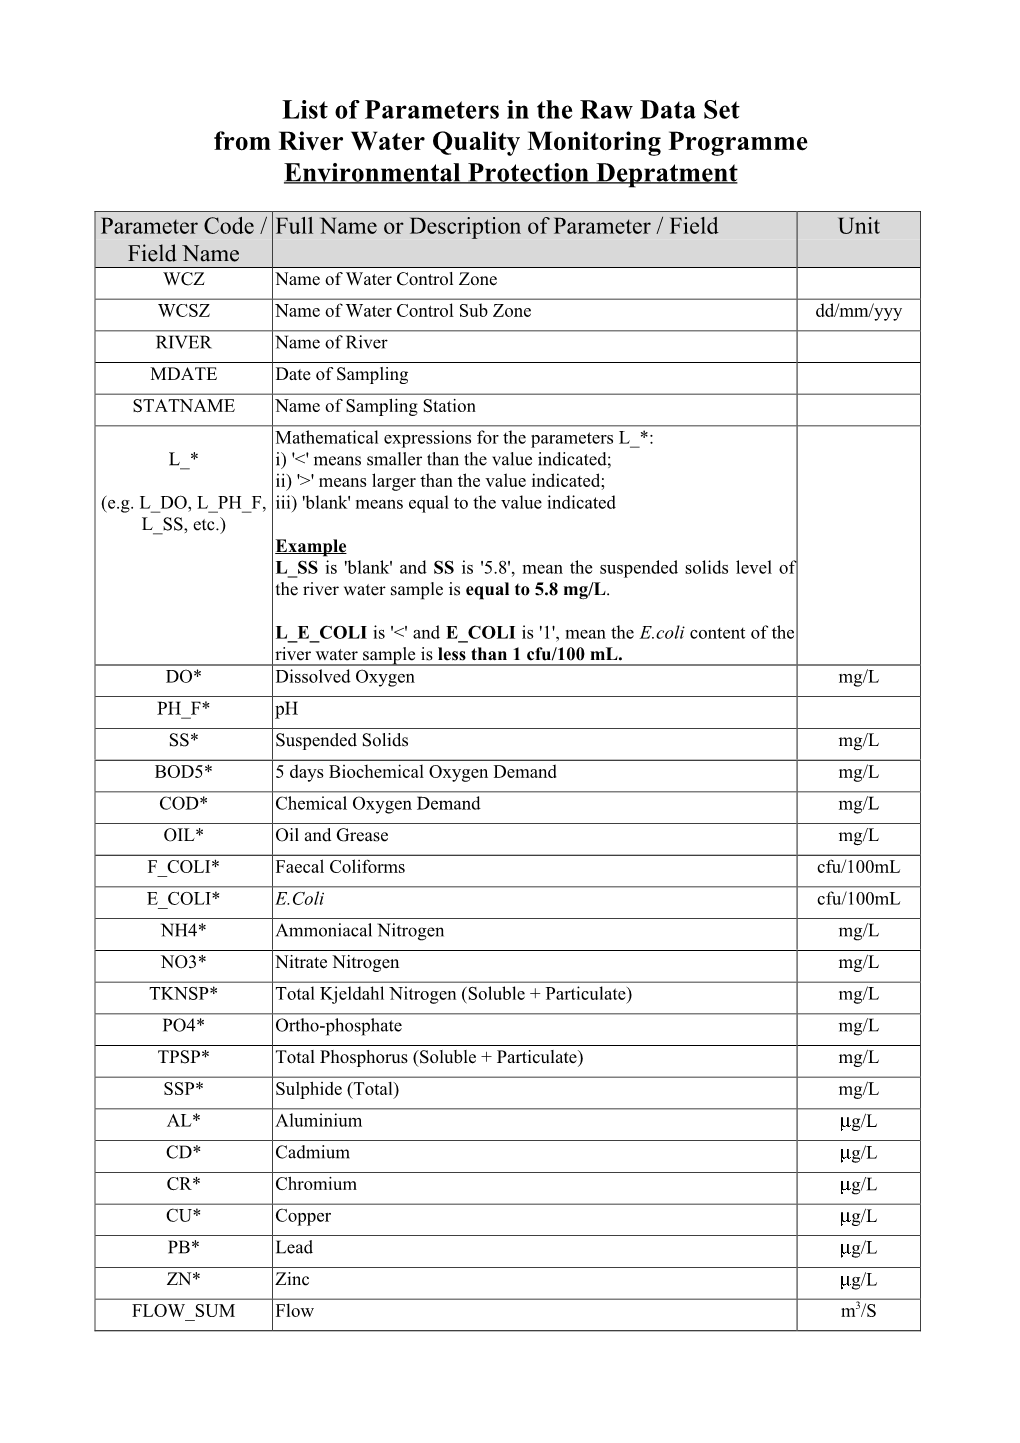 List of Parameters in the Raw Data Set from River Water Quality Monitoring Programme Environmental Protection Depratment